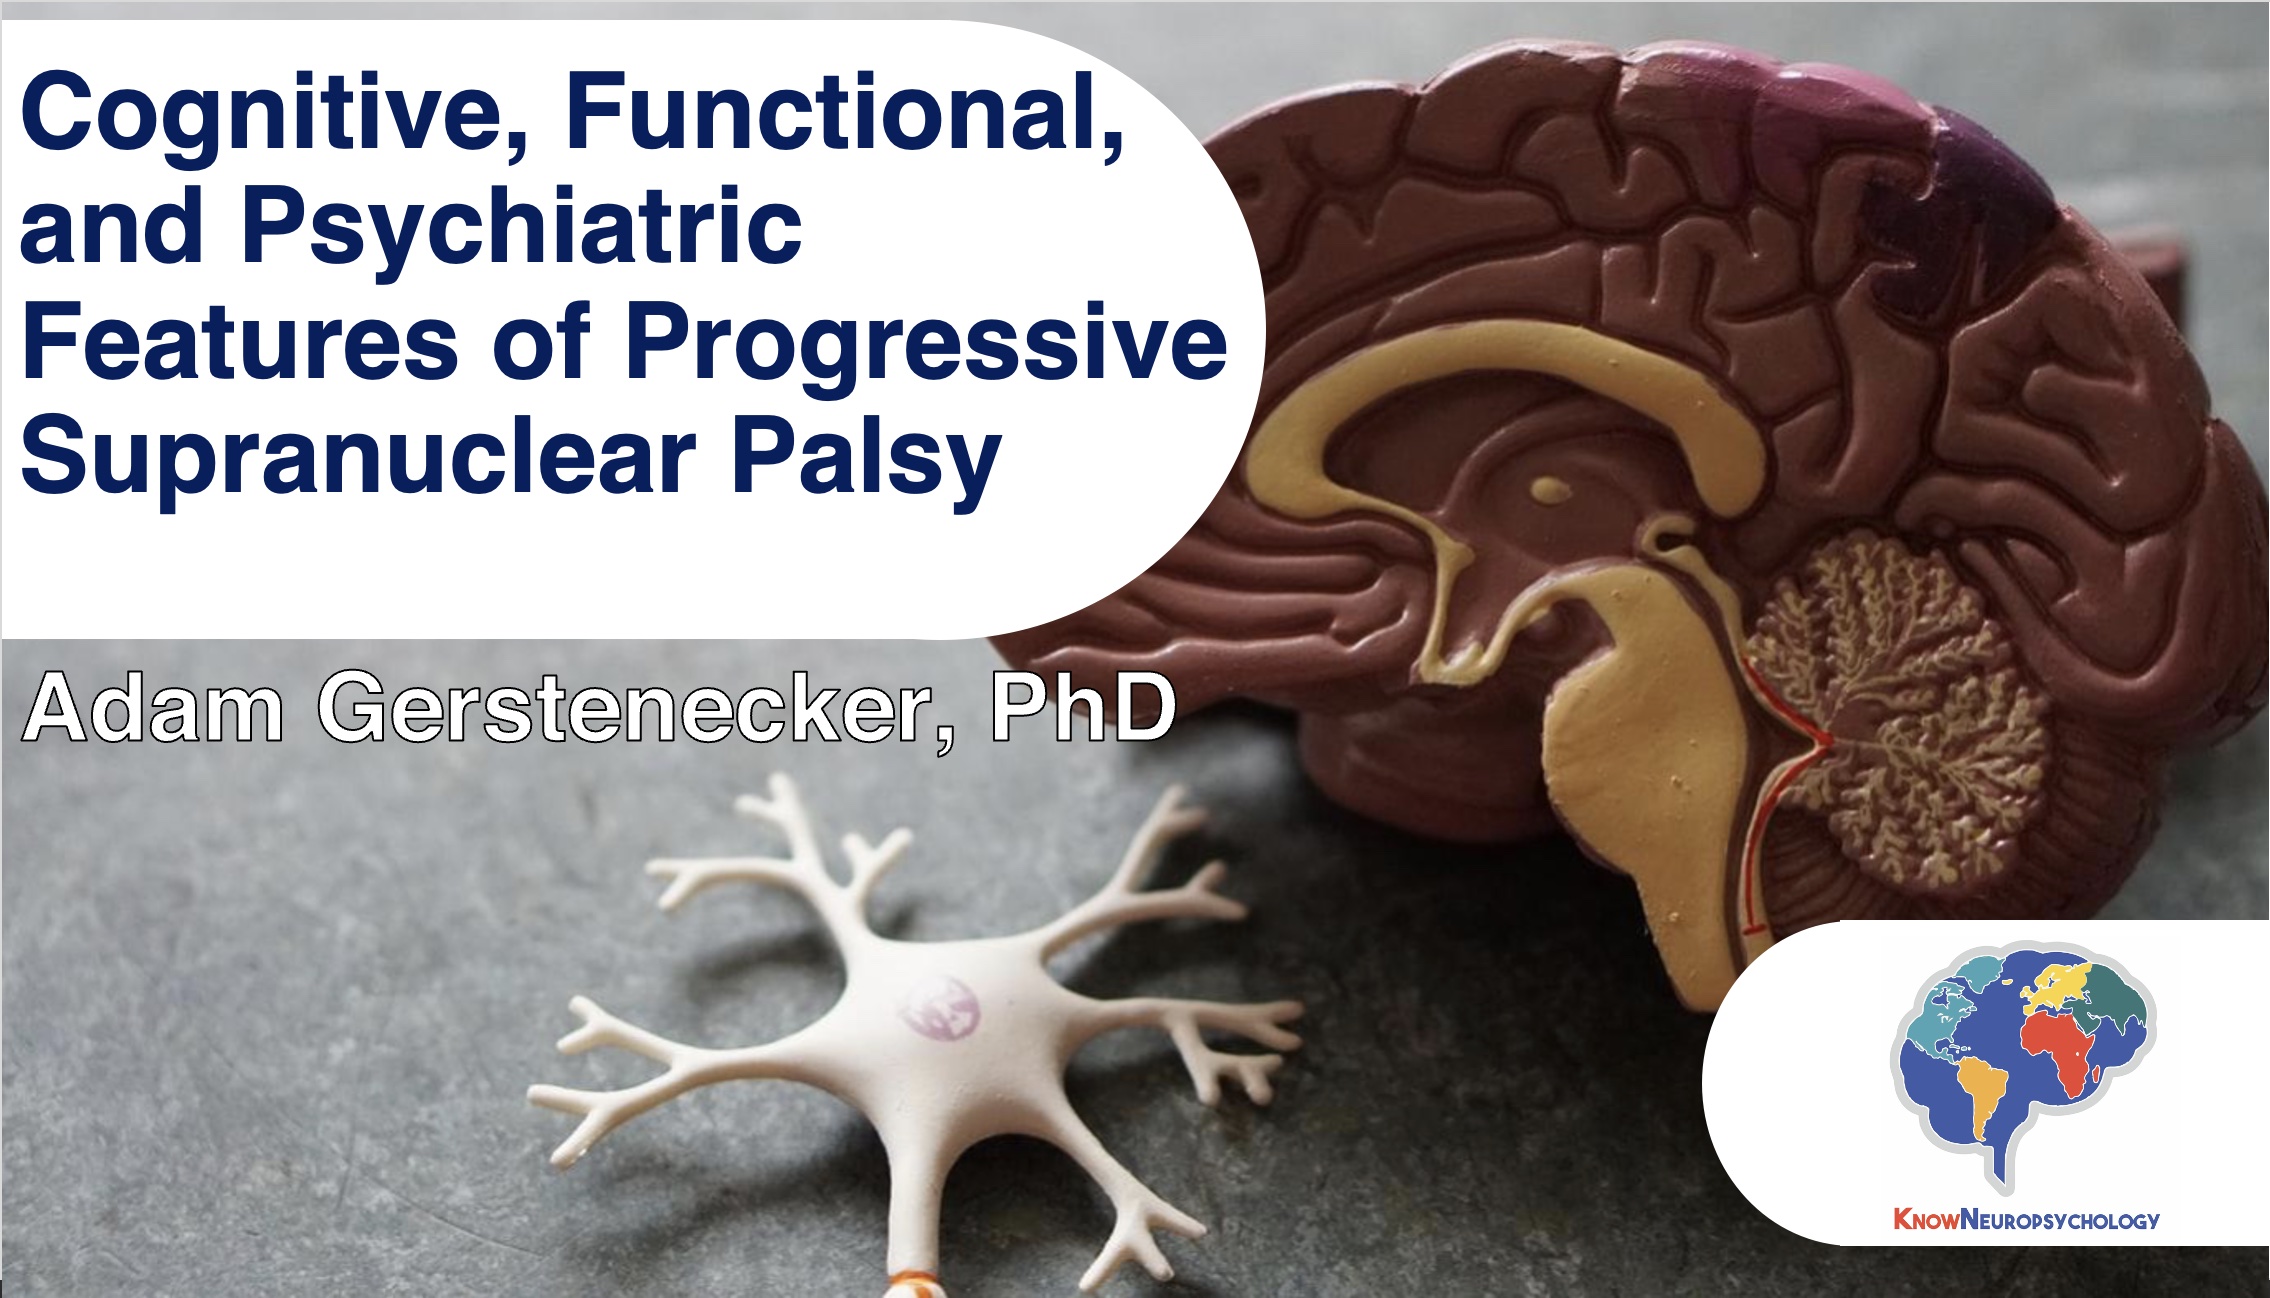 Cognitive, functional, and psychiatric features of progressive supranuclear palsy with Dr. Adam Gerstenecker